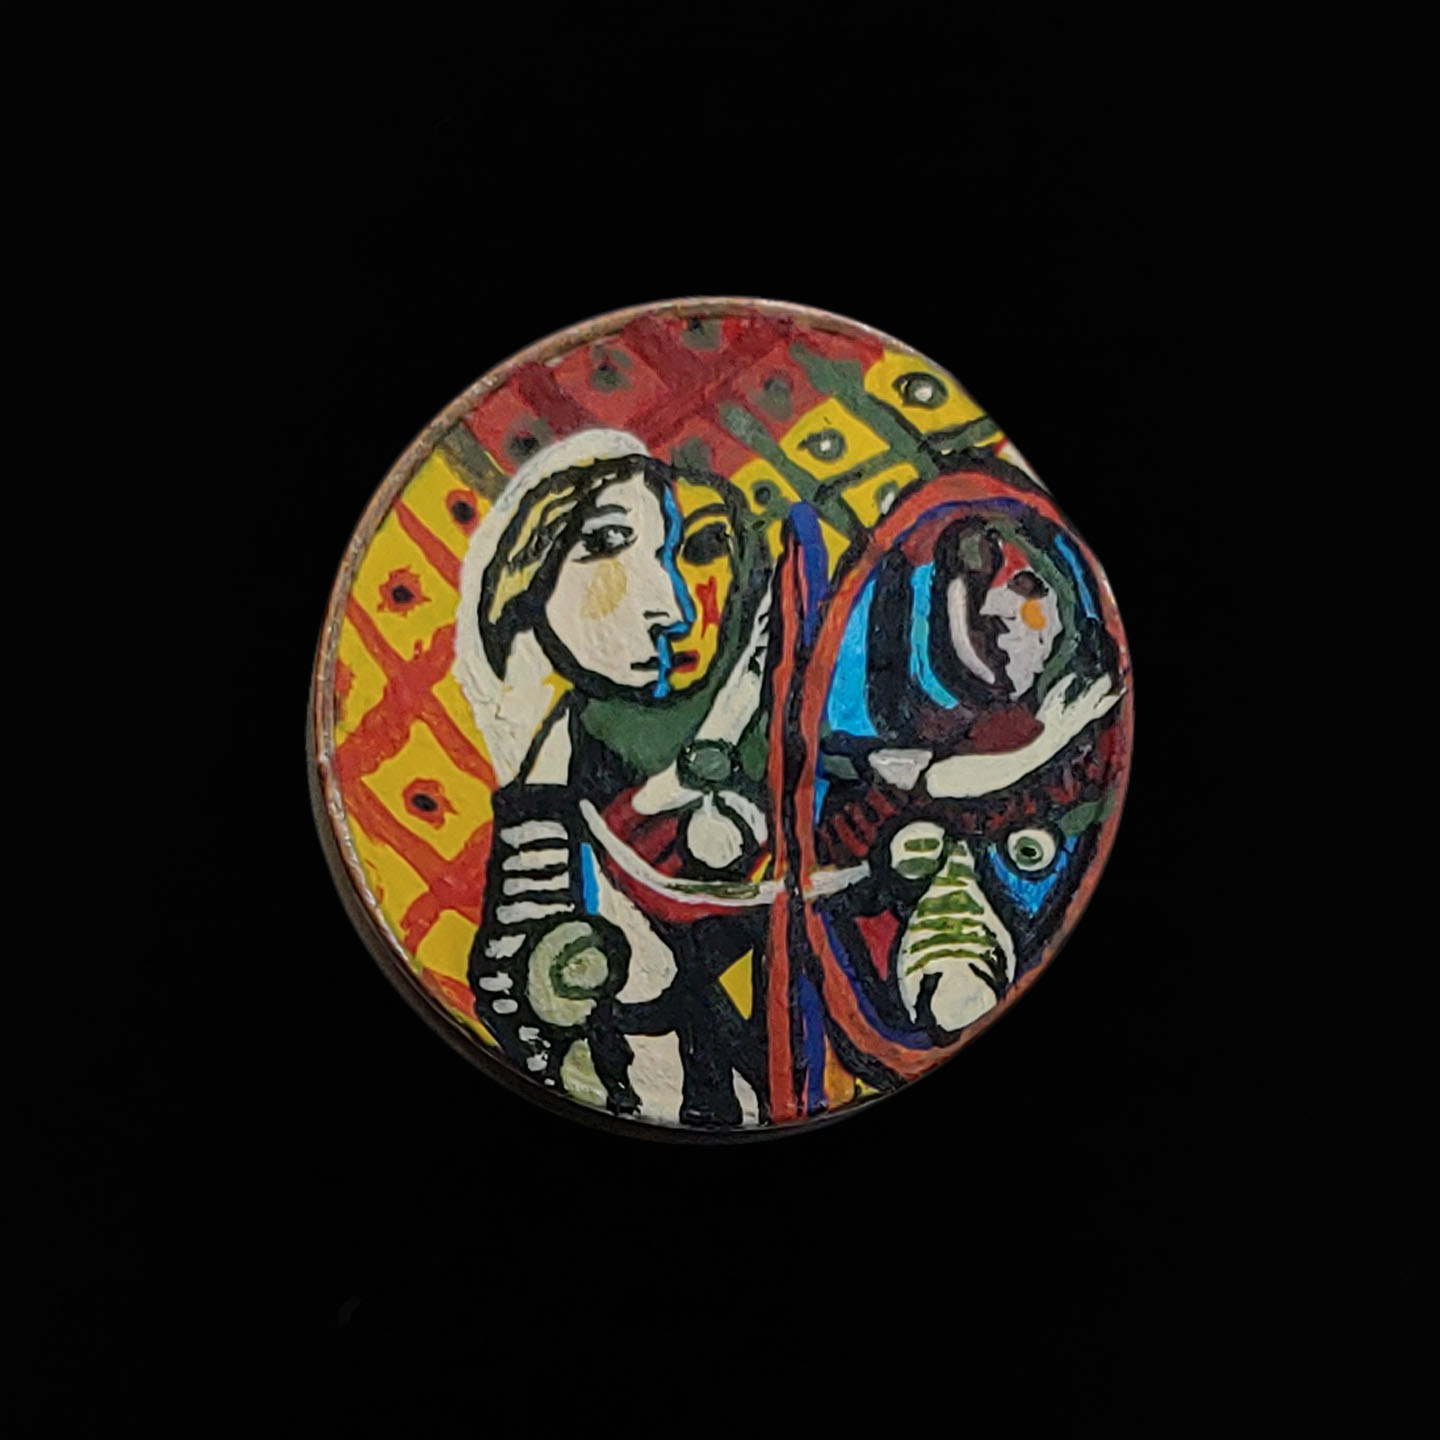 Painting on a penny